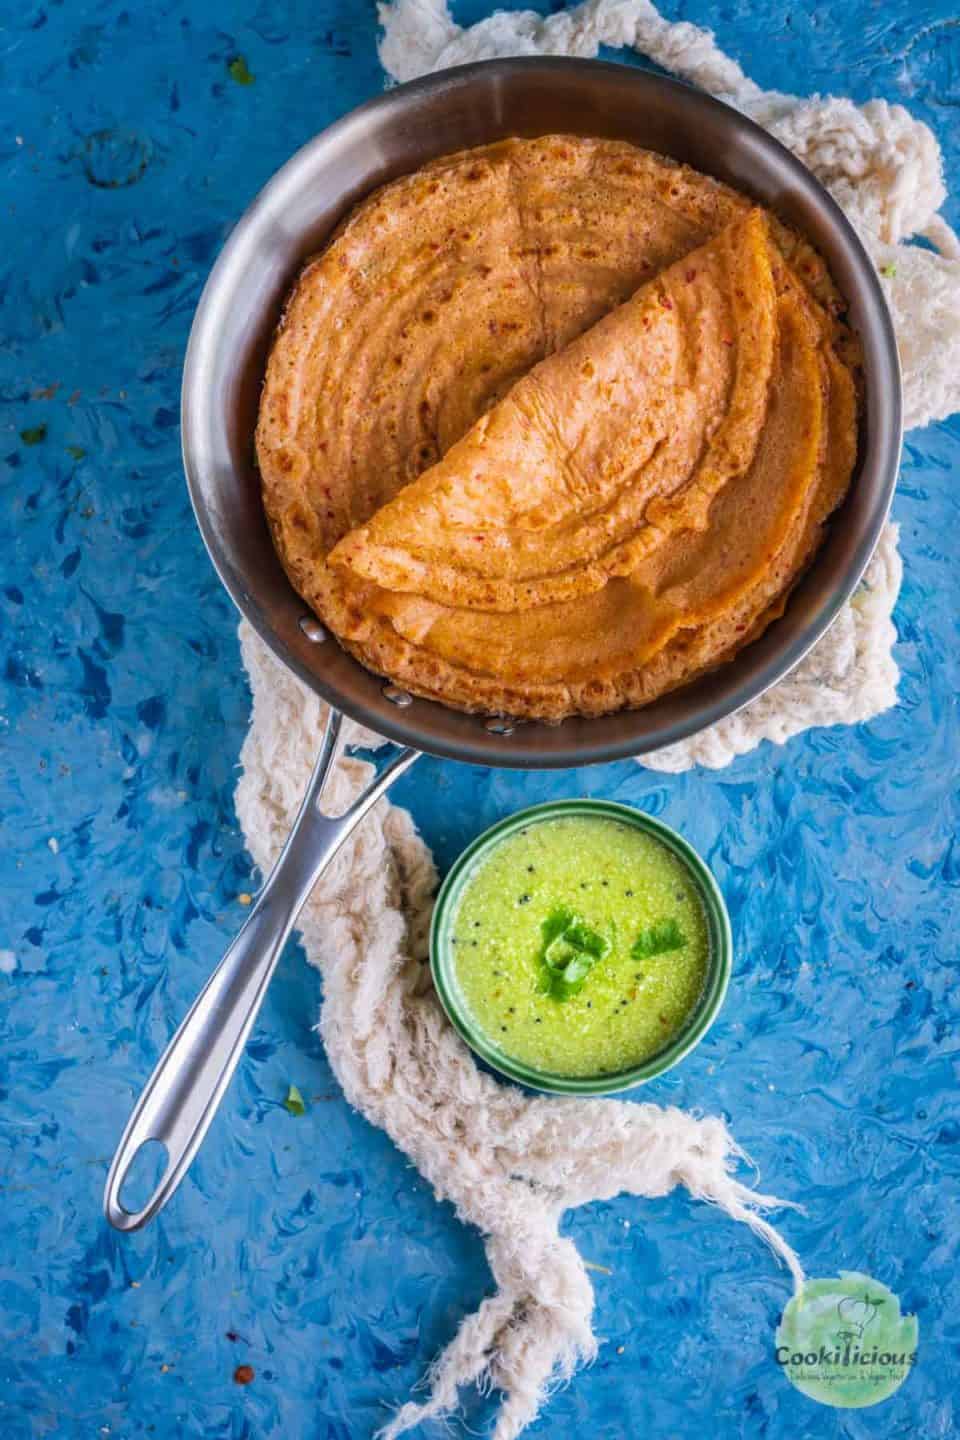 Oats Carrot Dosa in a steel skillet with a bowl of green chutney on the side